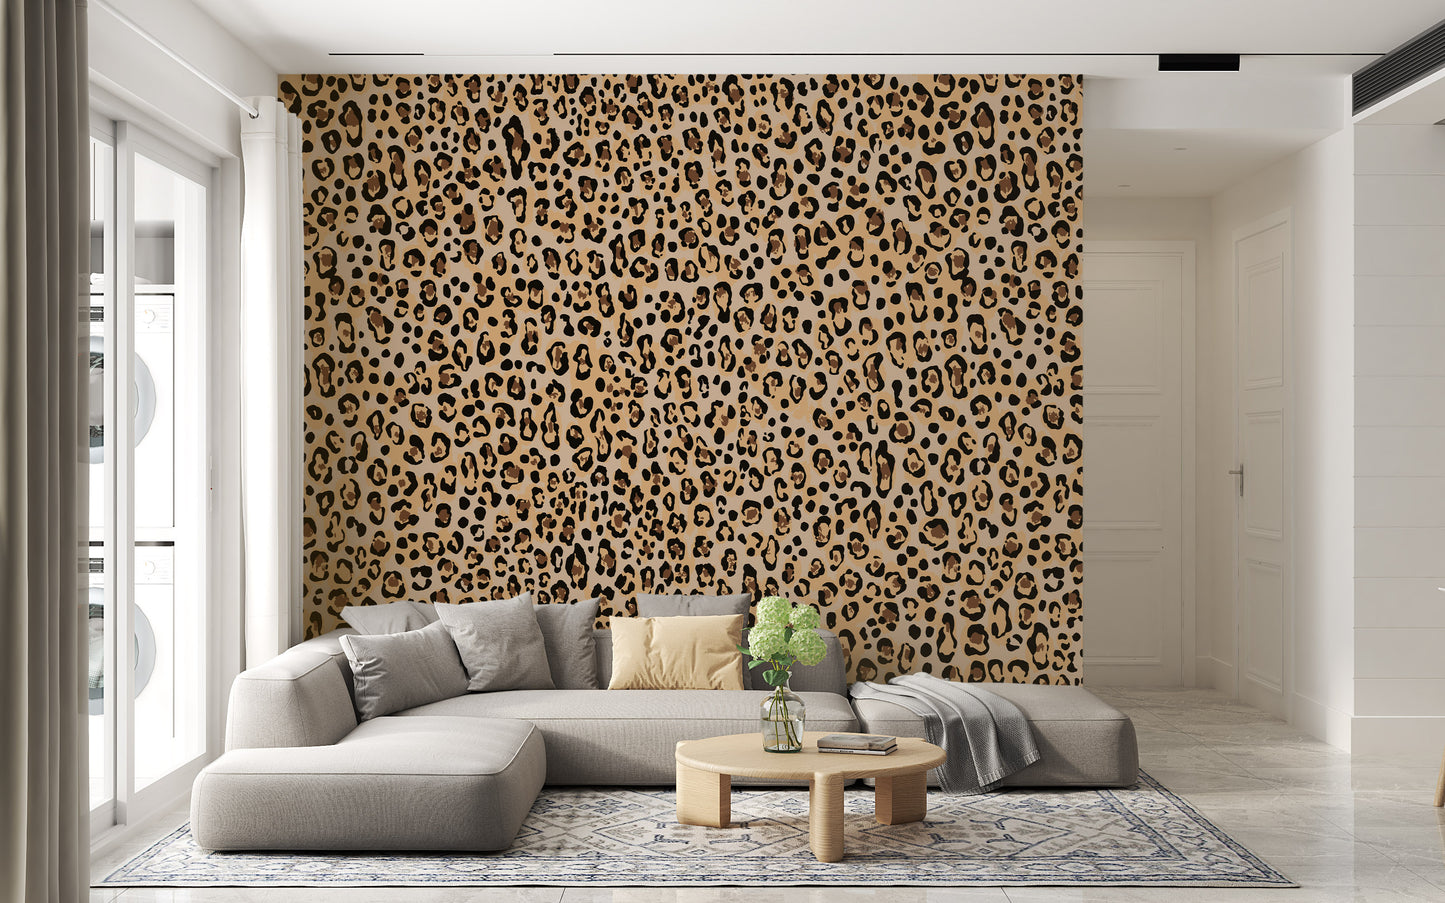 seamless jaguar leopard cheetah panther skin pattern animal background with small spots